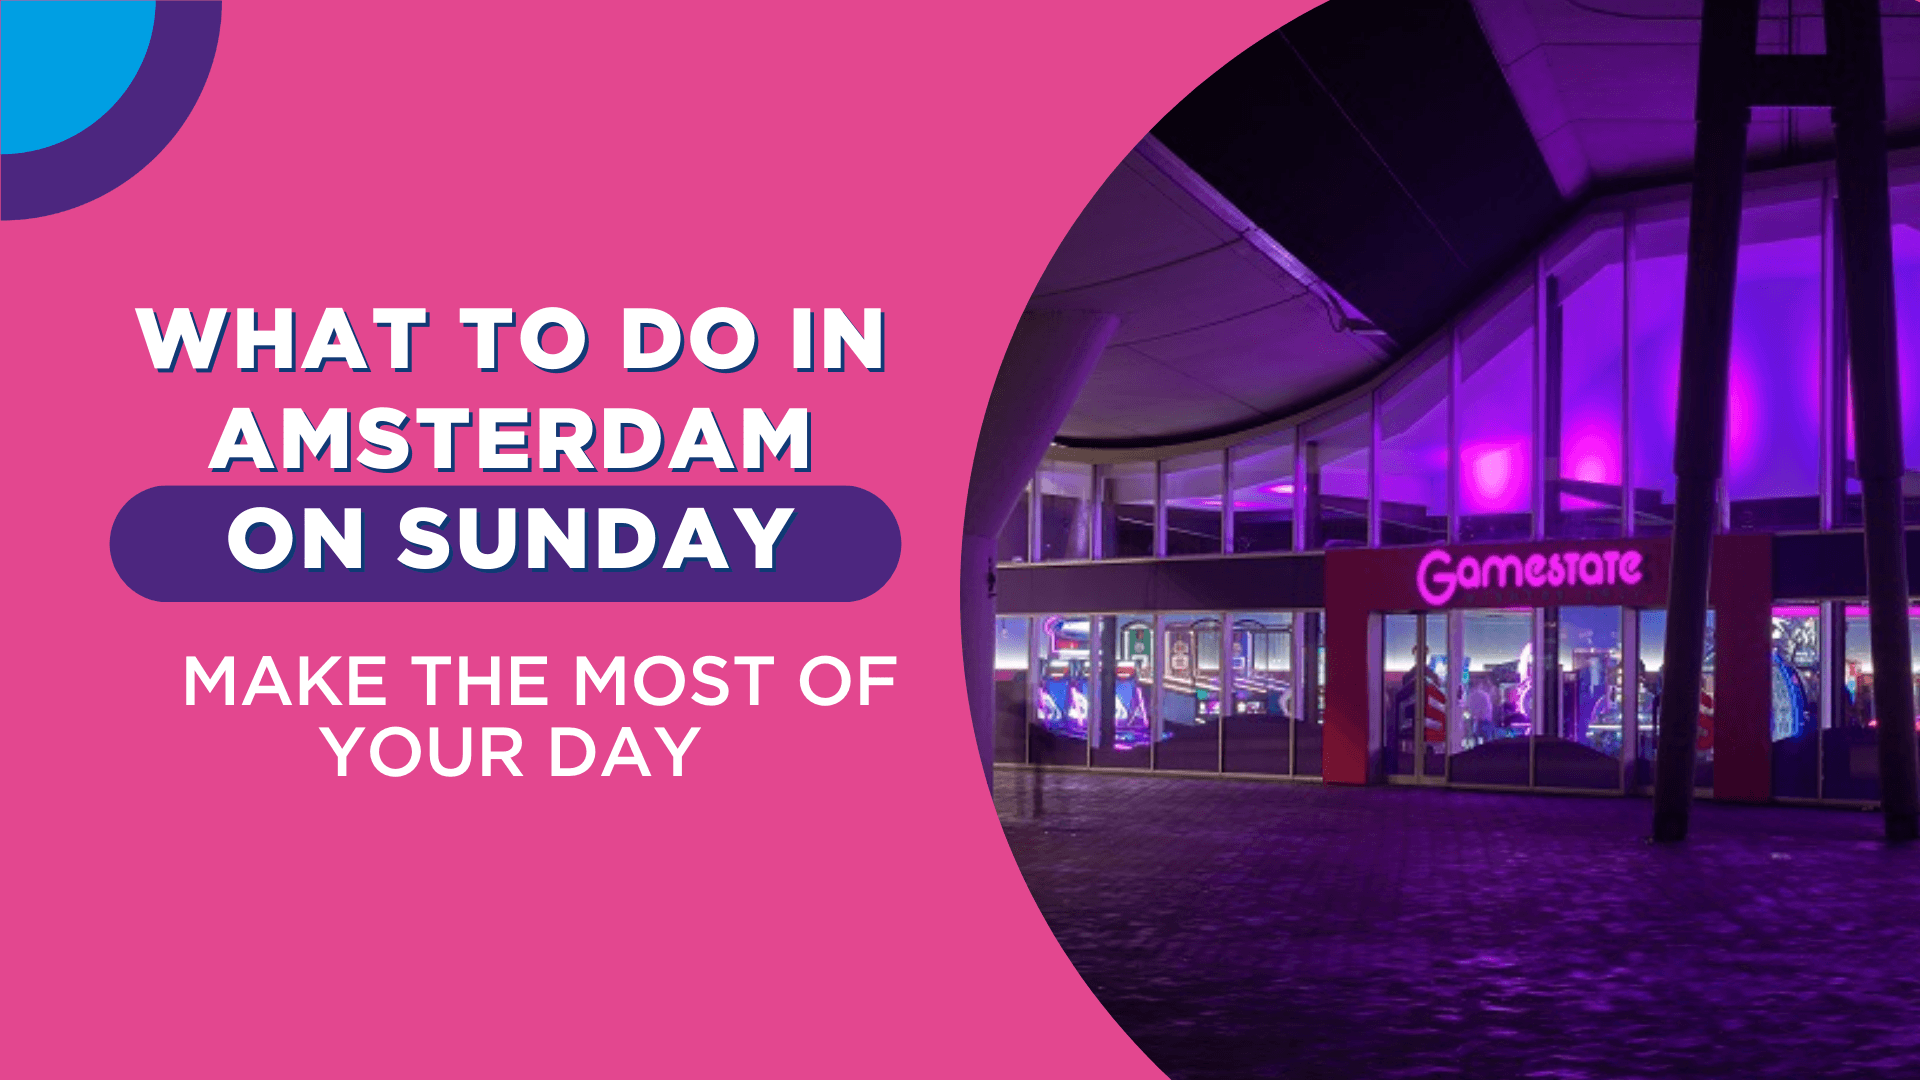 What to do in Amsterdam on Sunday: make the most of your day! - Gamestate